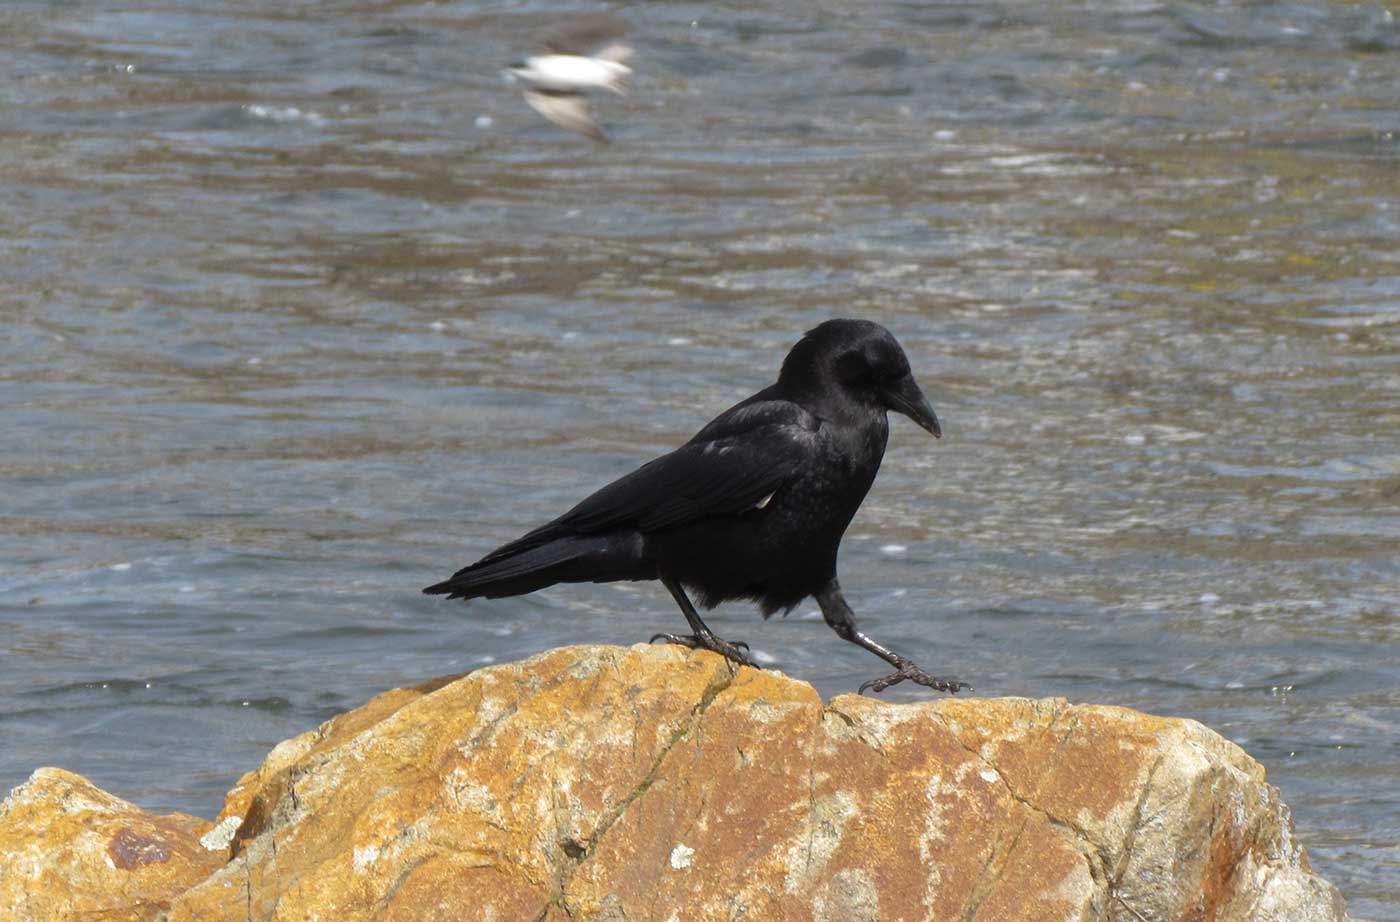 Crow sitting on a rock with water behind it